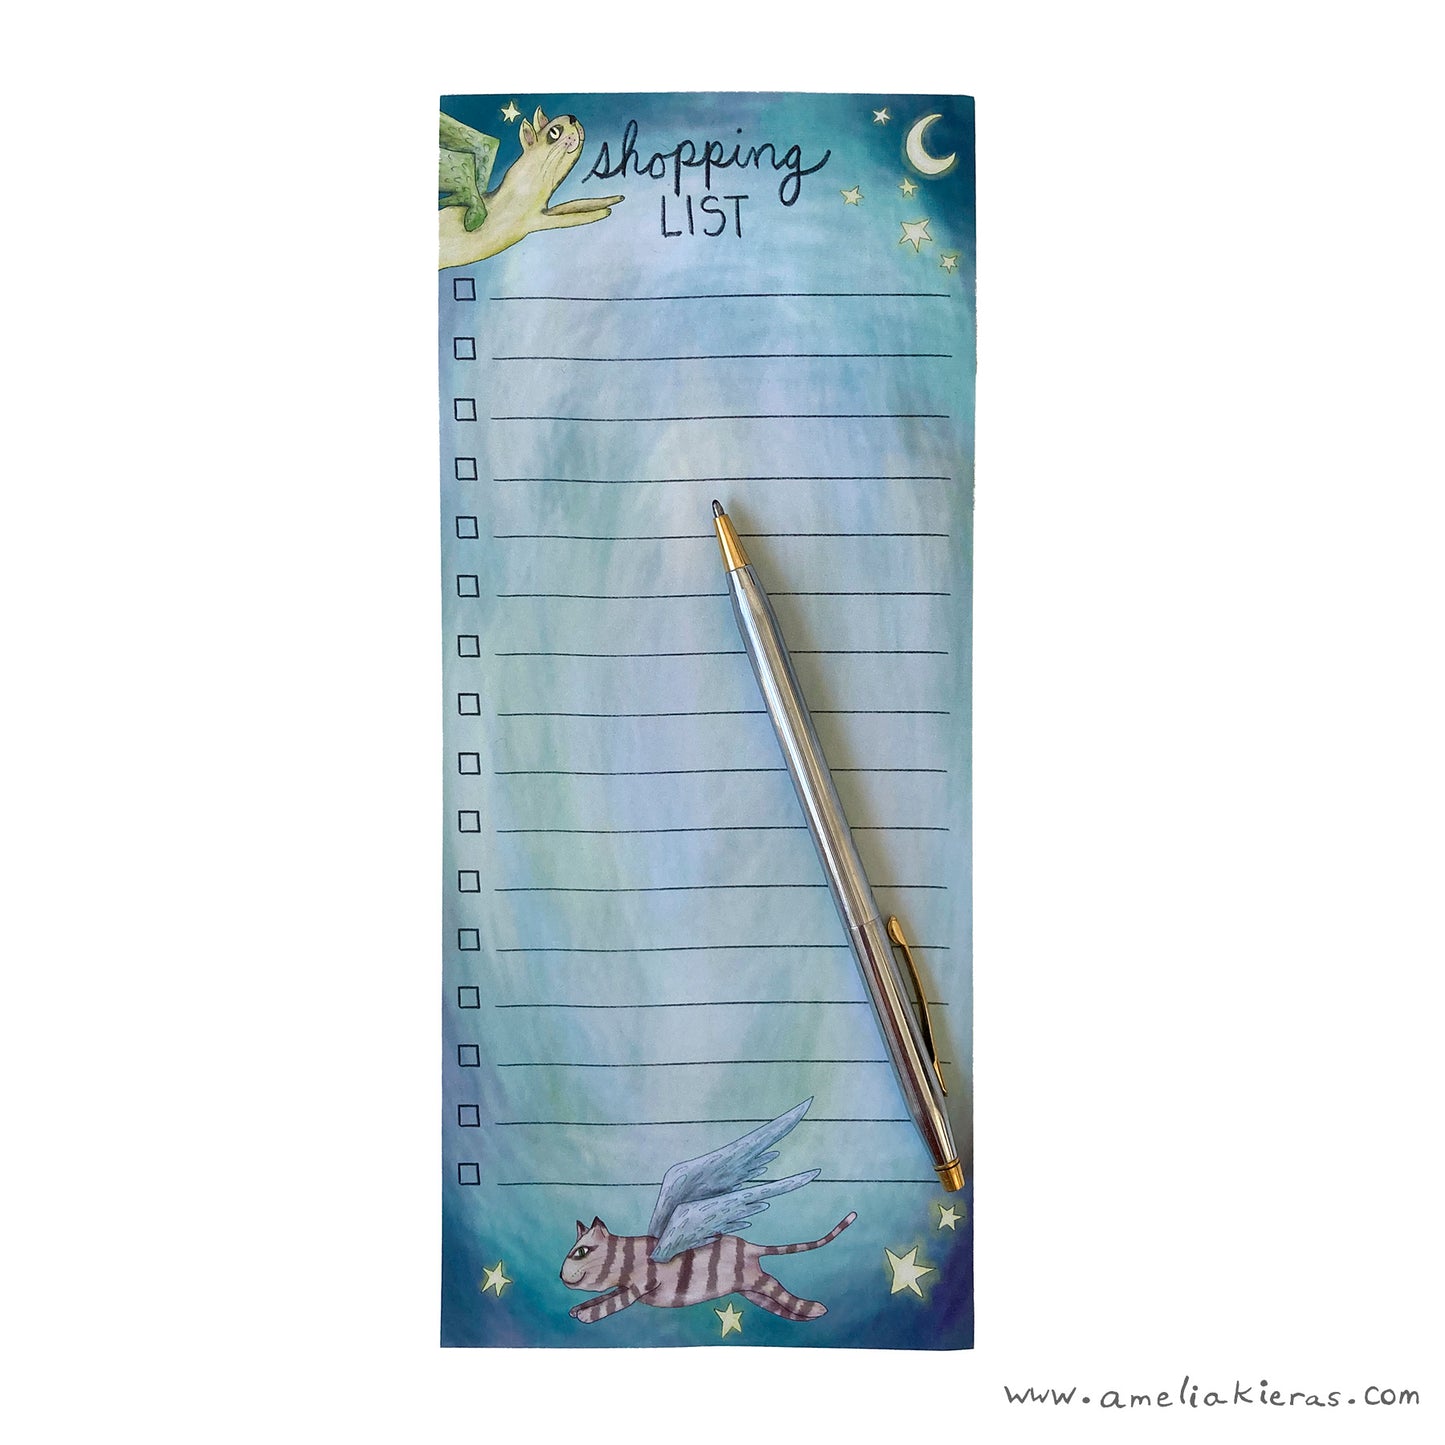 Flying Cat Shopping List Notepad, Lined, 4"x 9.25"